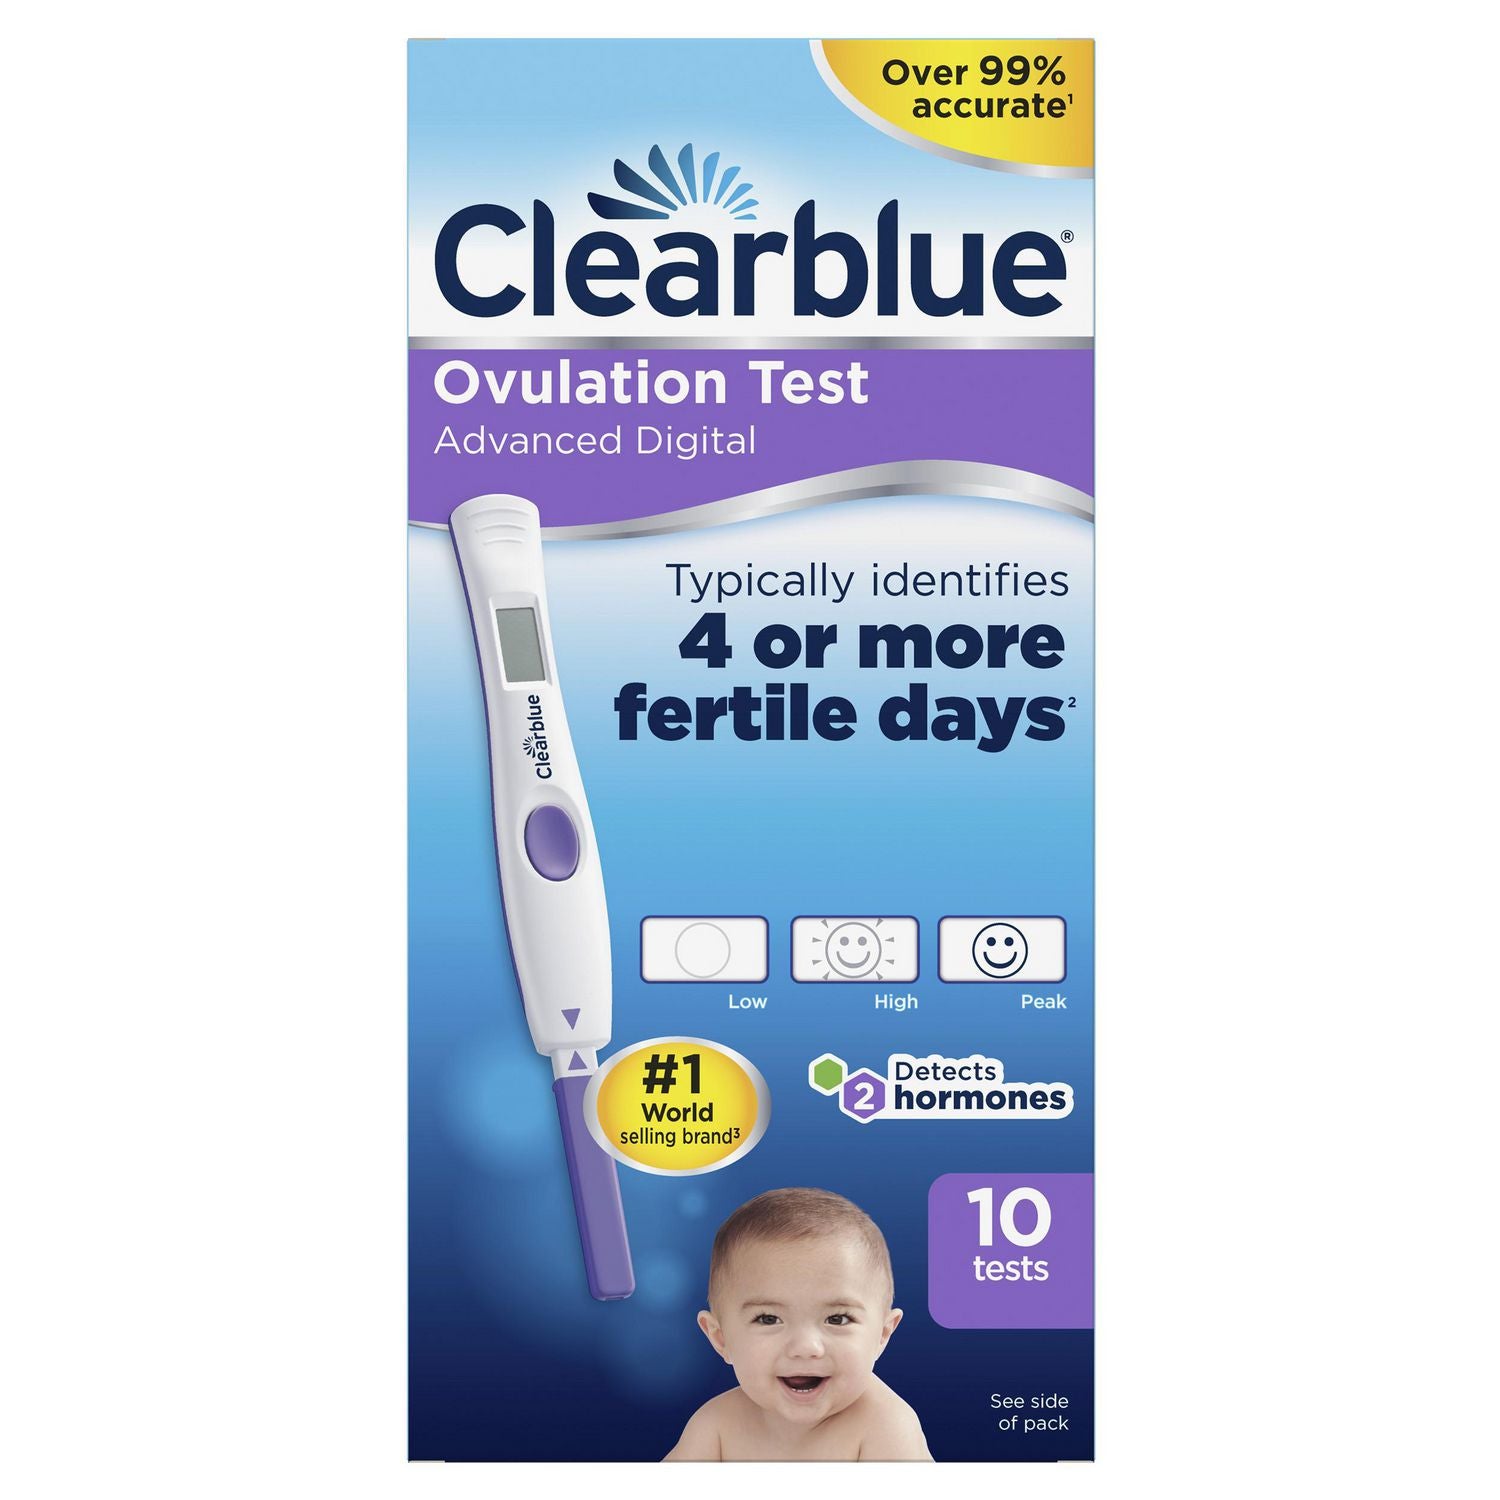 Clearblue овуляция купить. Тест Clearblue Digital Ovulation Test. Clearblue Advanced Digital Ovulation Test. Clearblue Digital овуляция. Clearblue Ovulation Test.